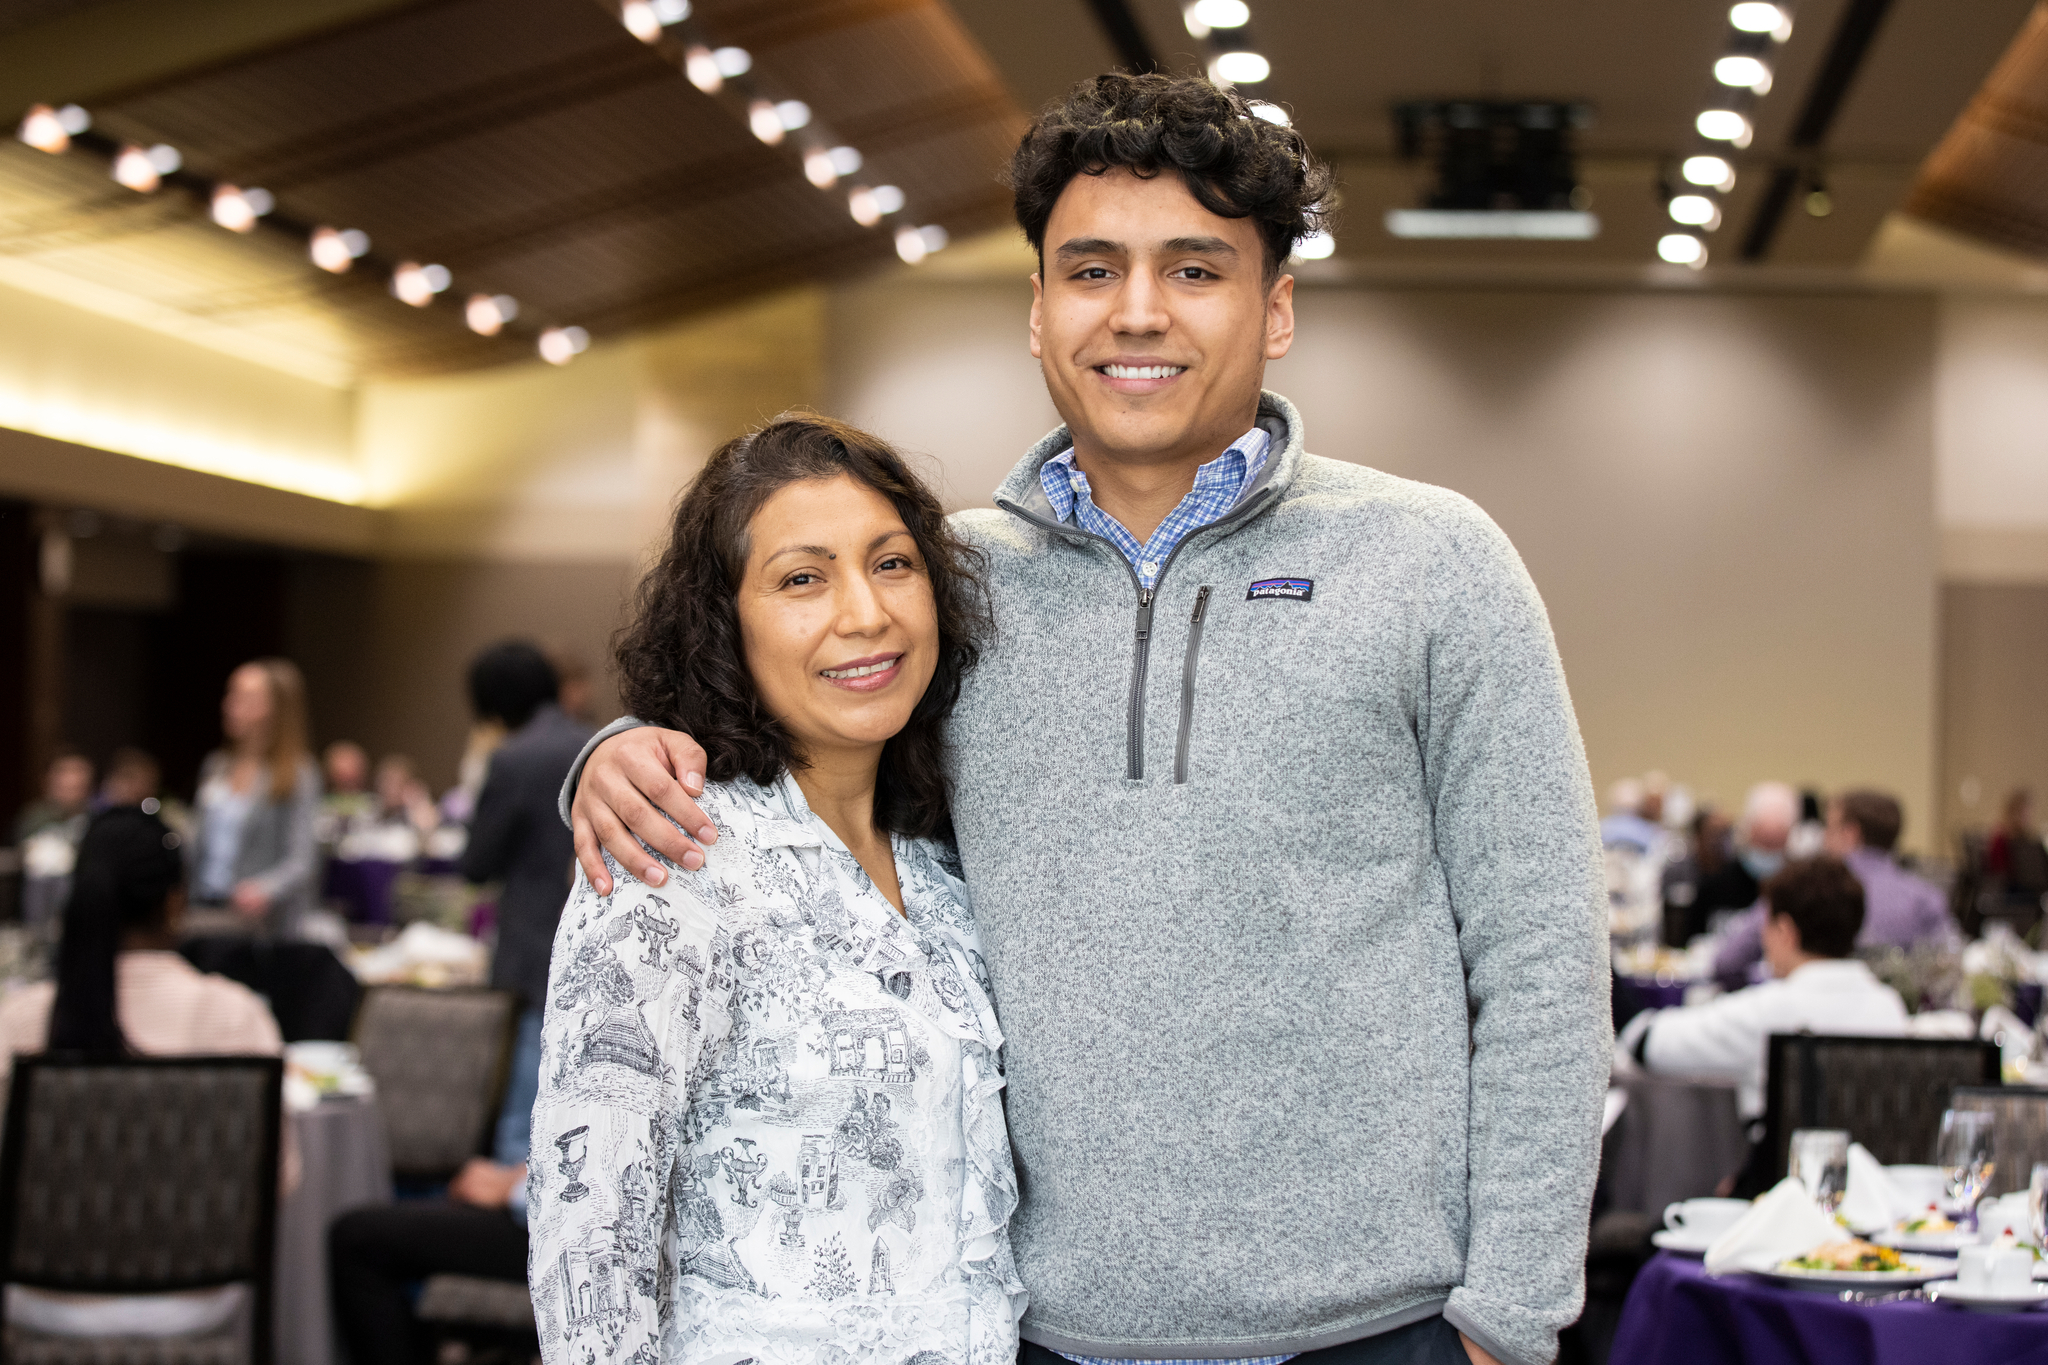 Student stands for a photo with his mother during the annual Scholarship Spotlight luncheon